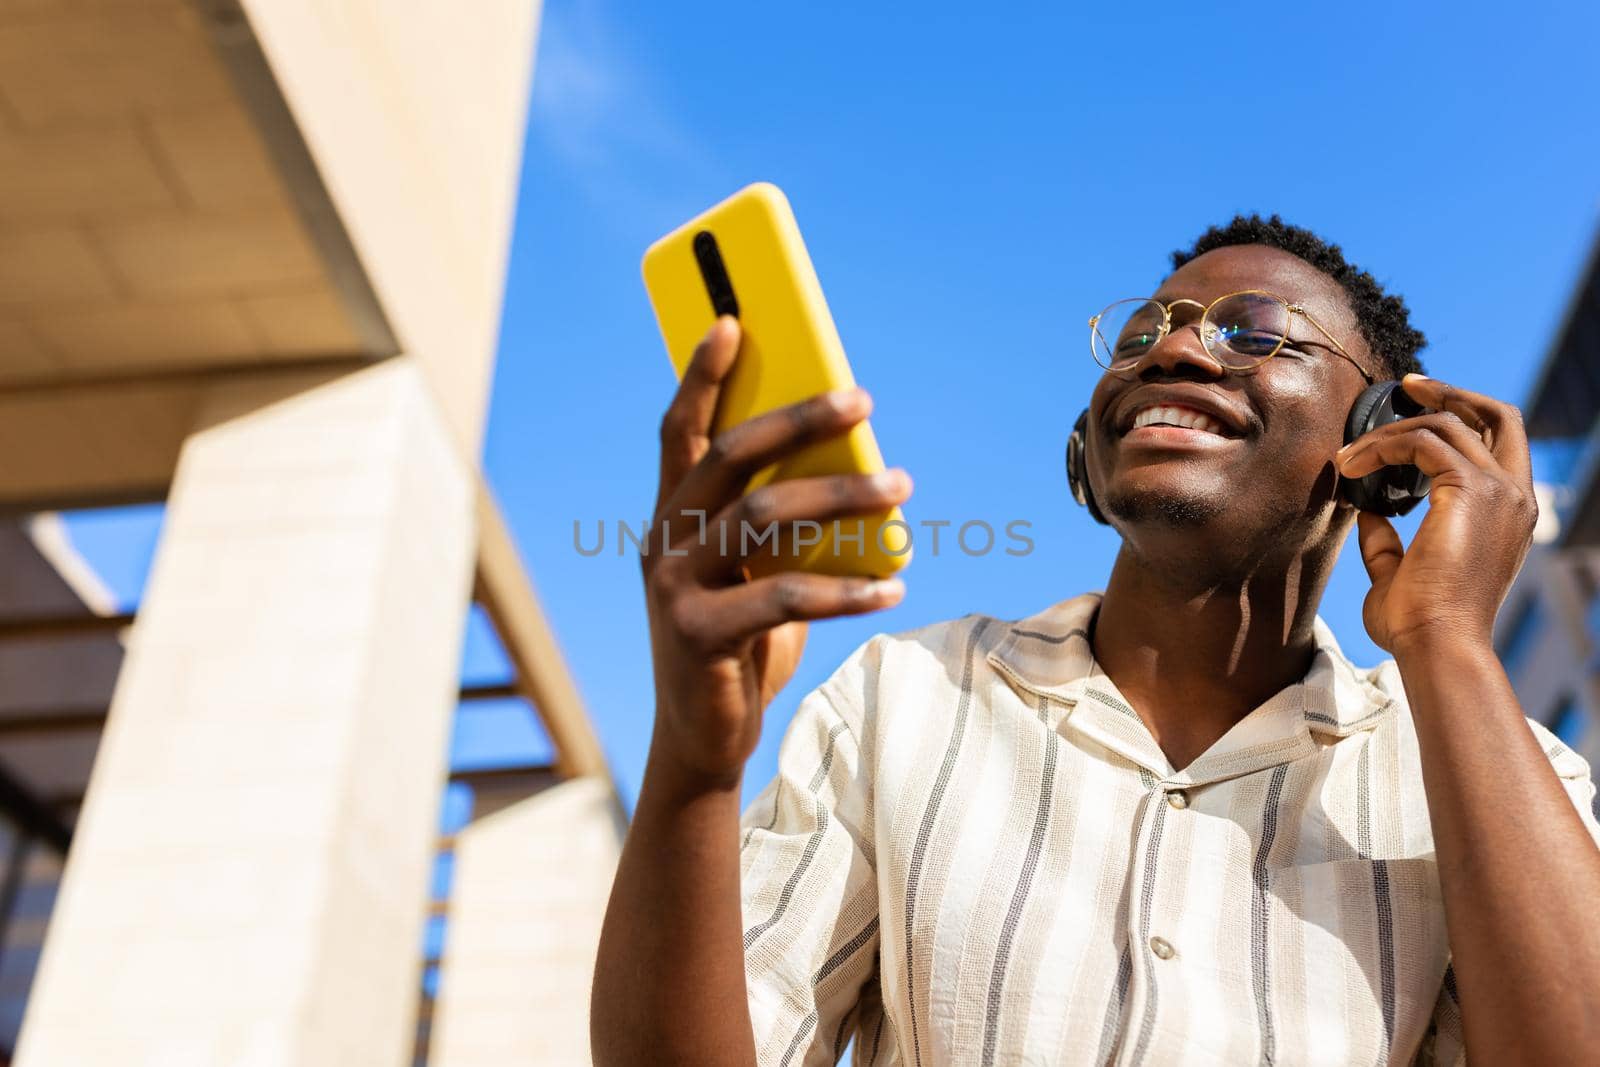 Black young man relaxing outdoors listening to music using phone and headphones. Copy space. Lifestyle concept.